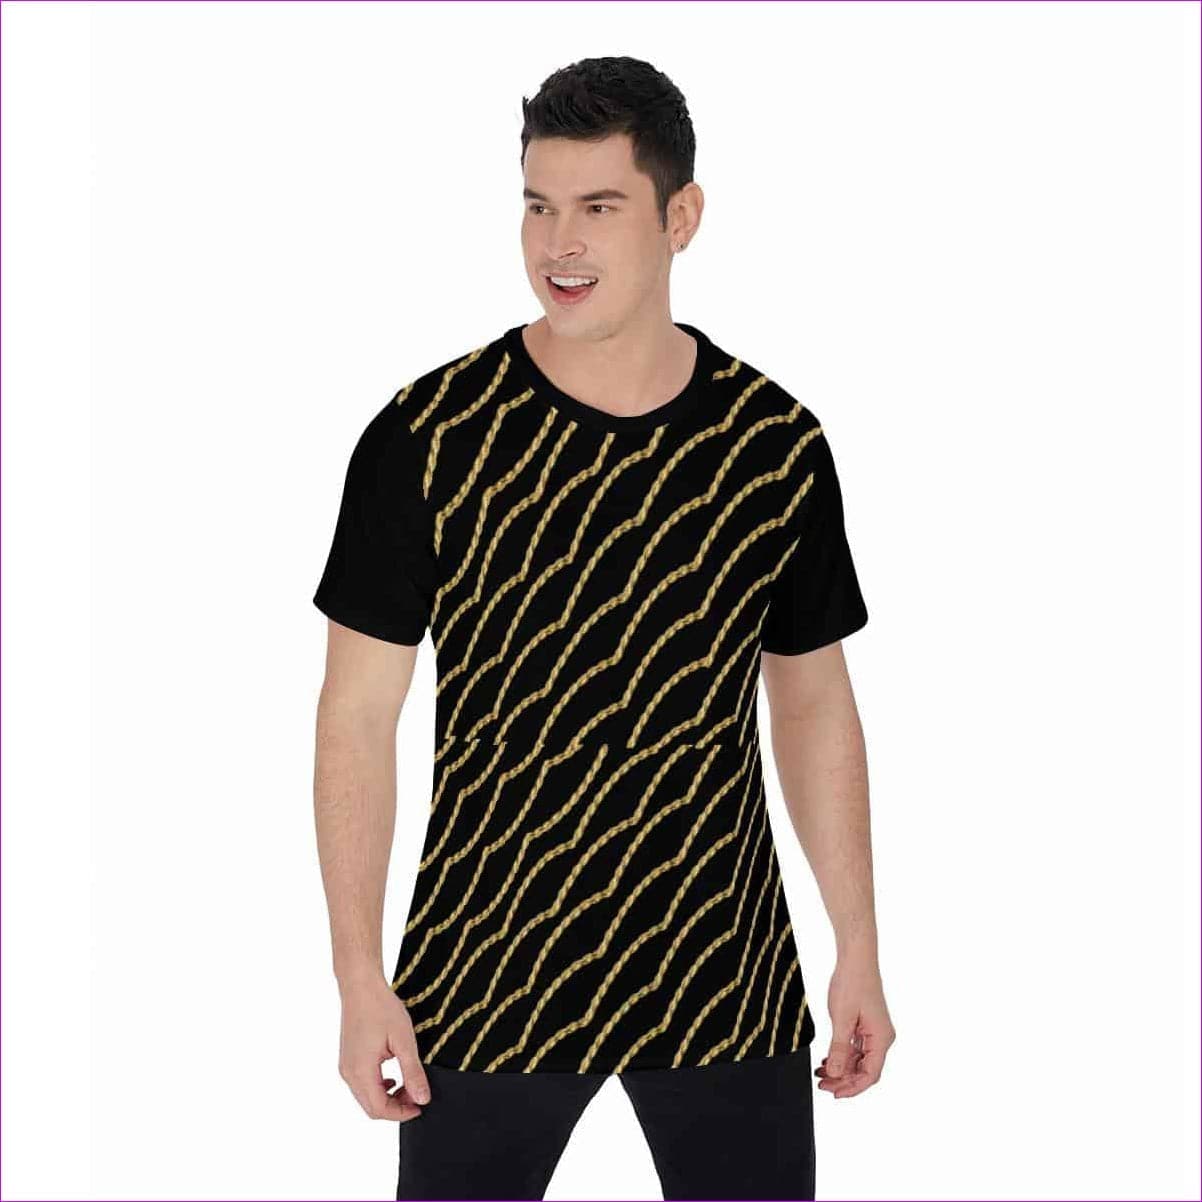 Black Chained Men's O-Neck T-Shirt - Men's T-Shirts at TFC&H Co.